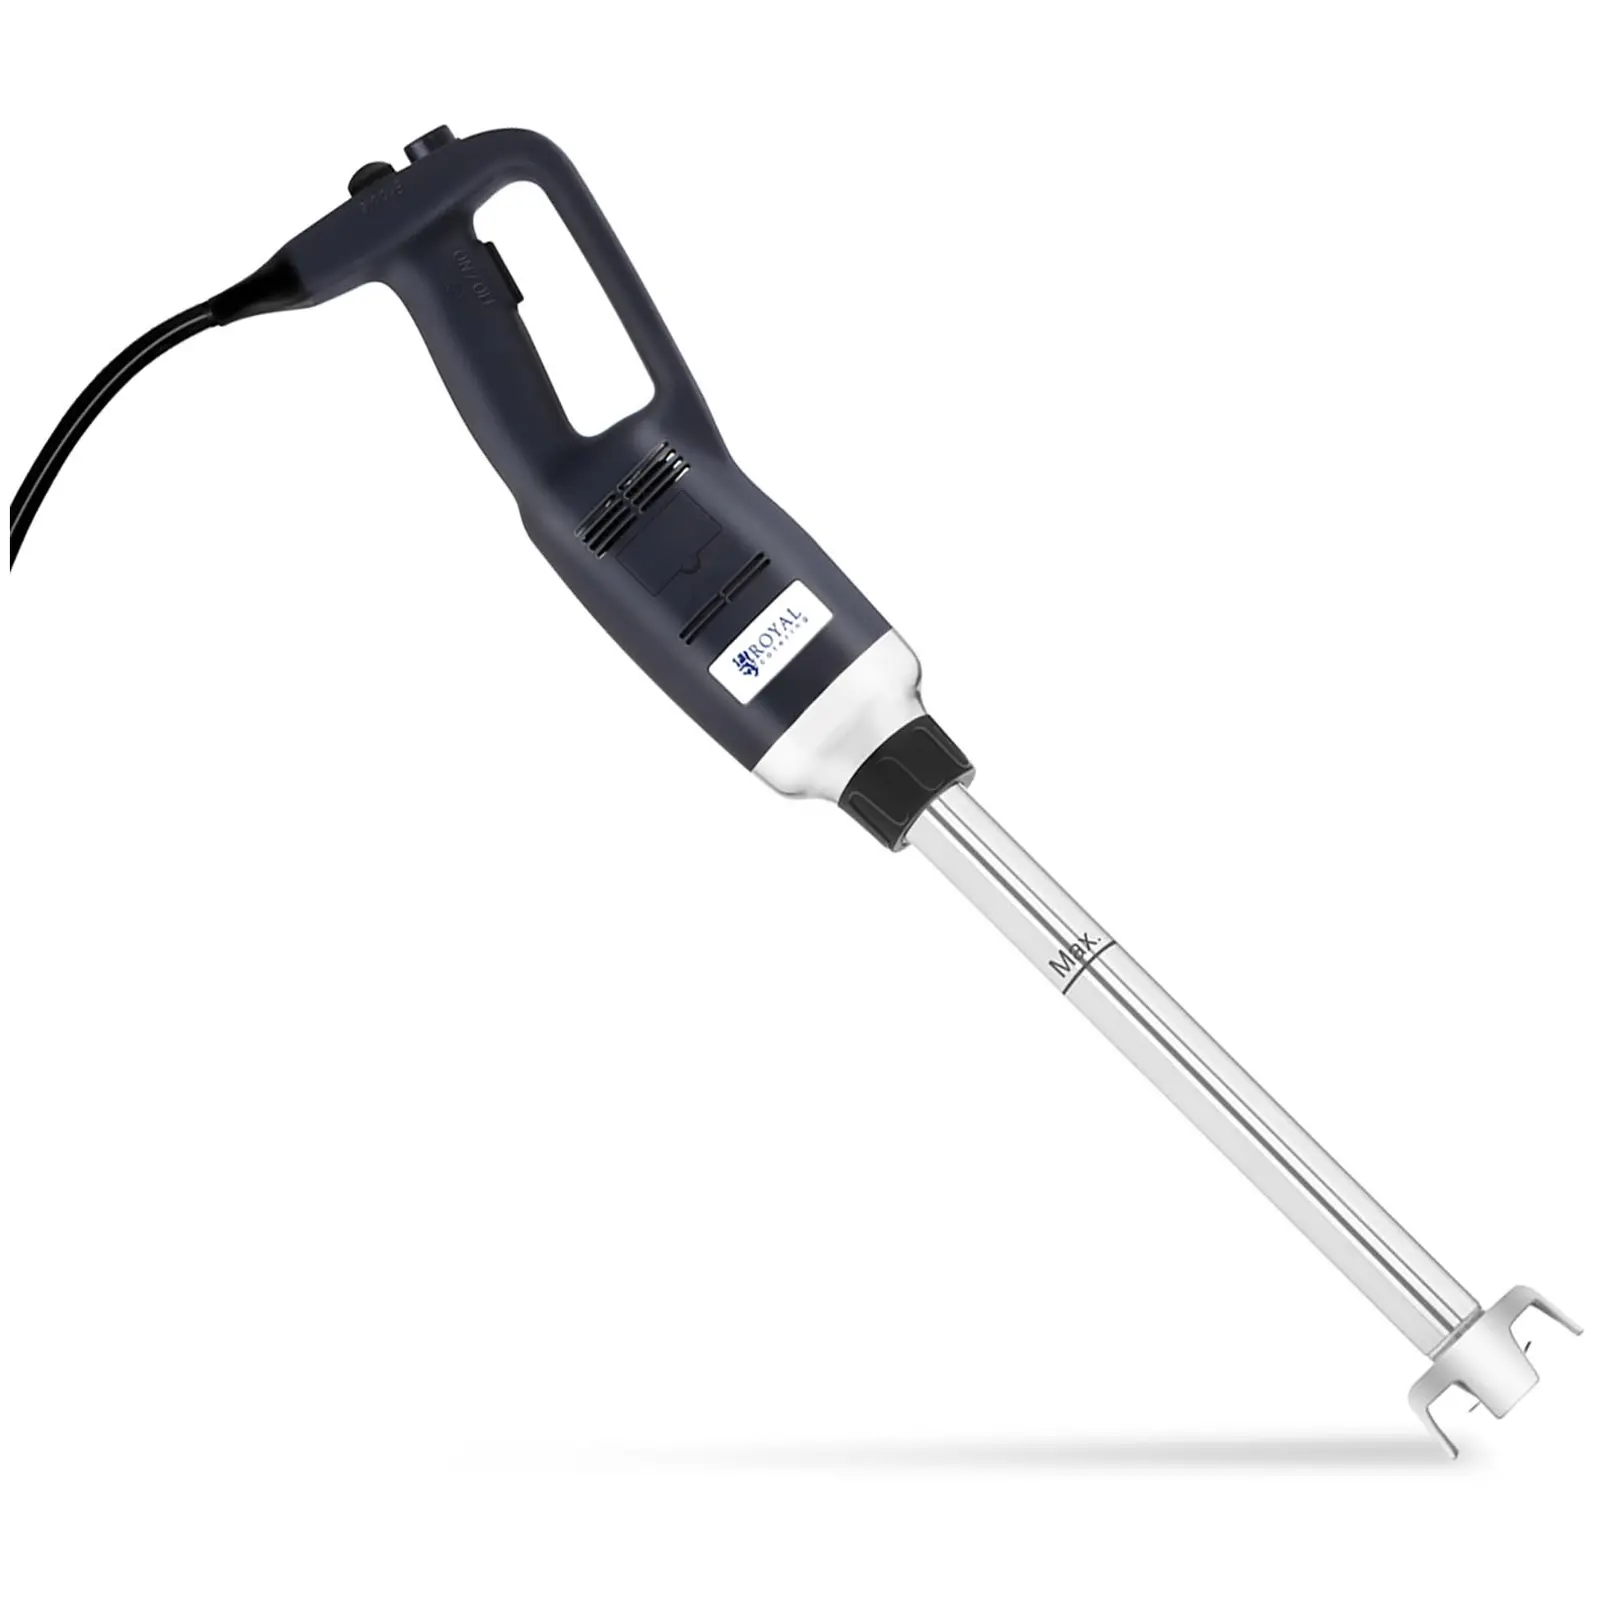 Hand blender - 350 W - 400 mm - 4,000 to 18,000 rpm - 1